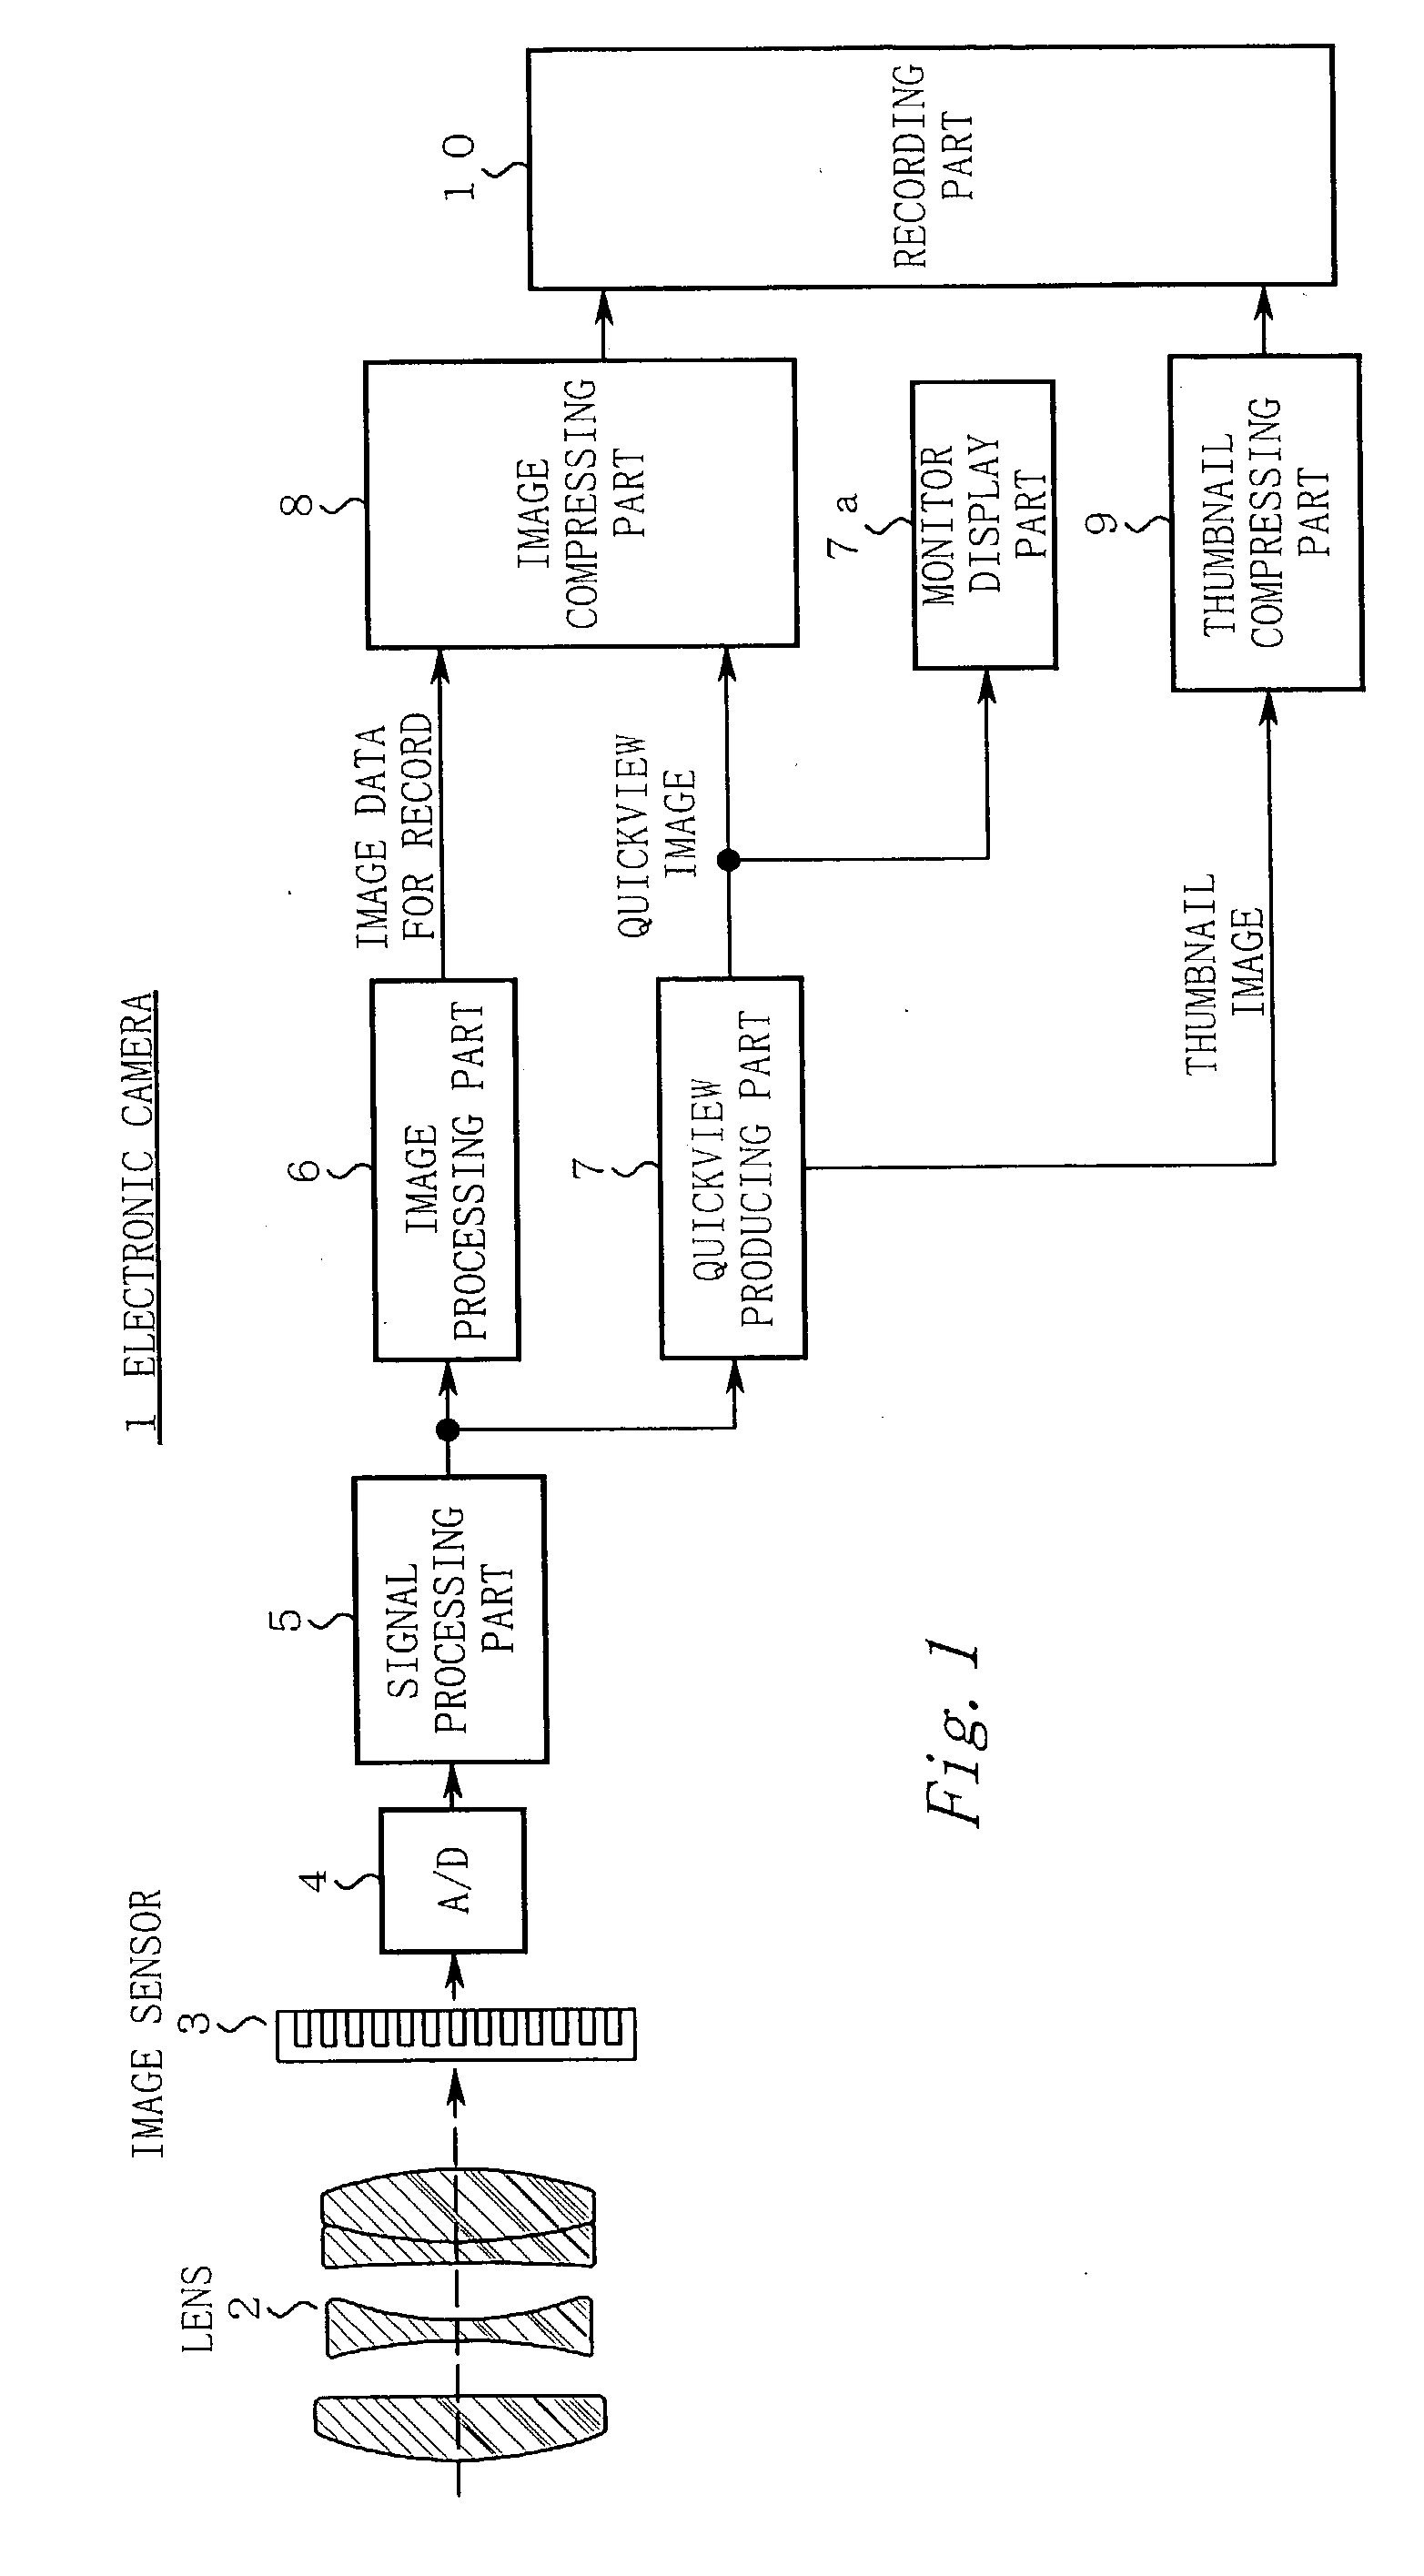 Electronic camera for producing quickview images